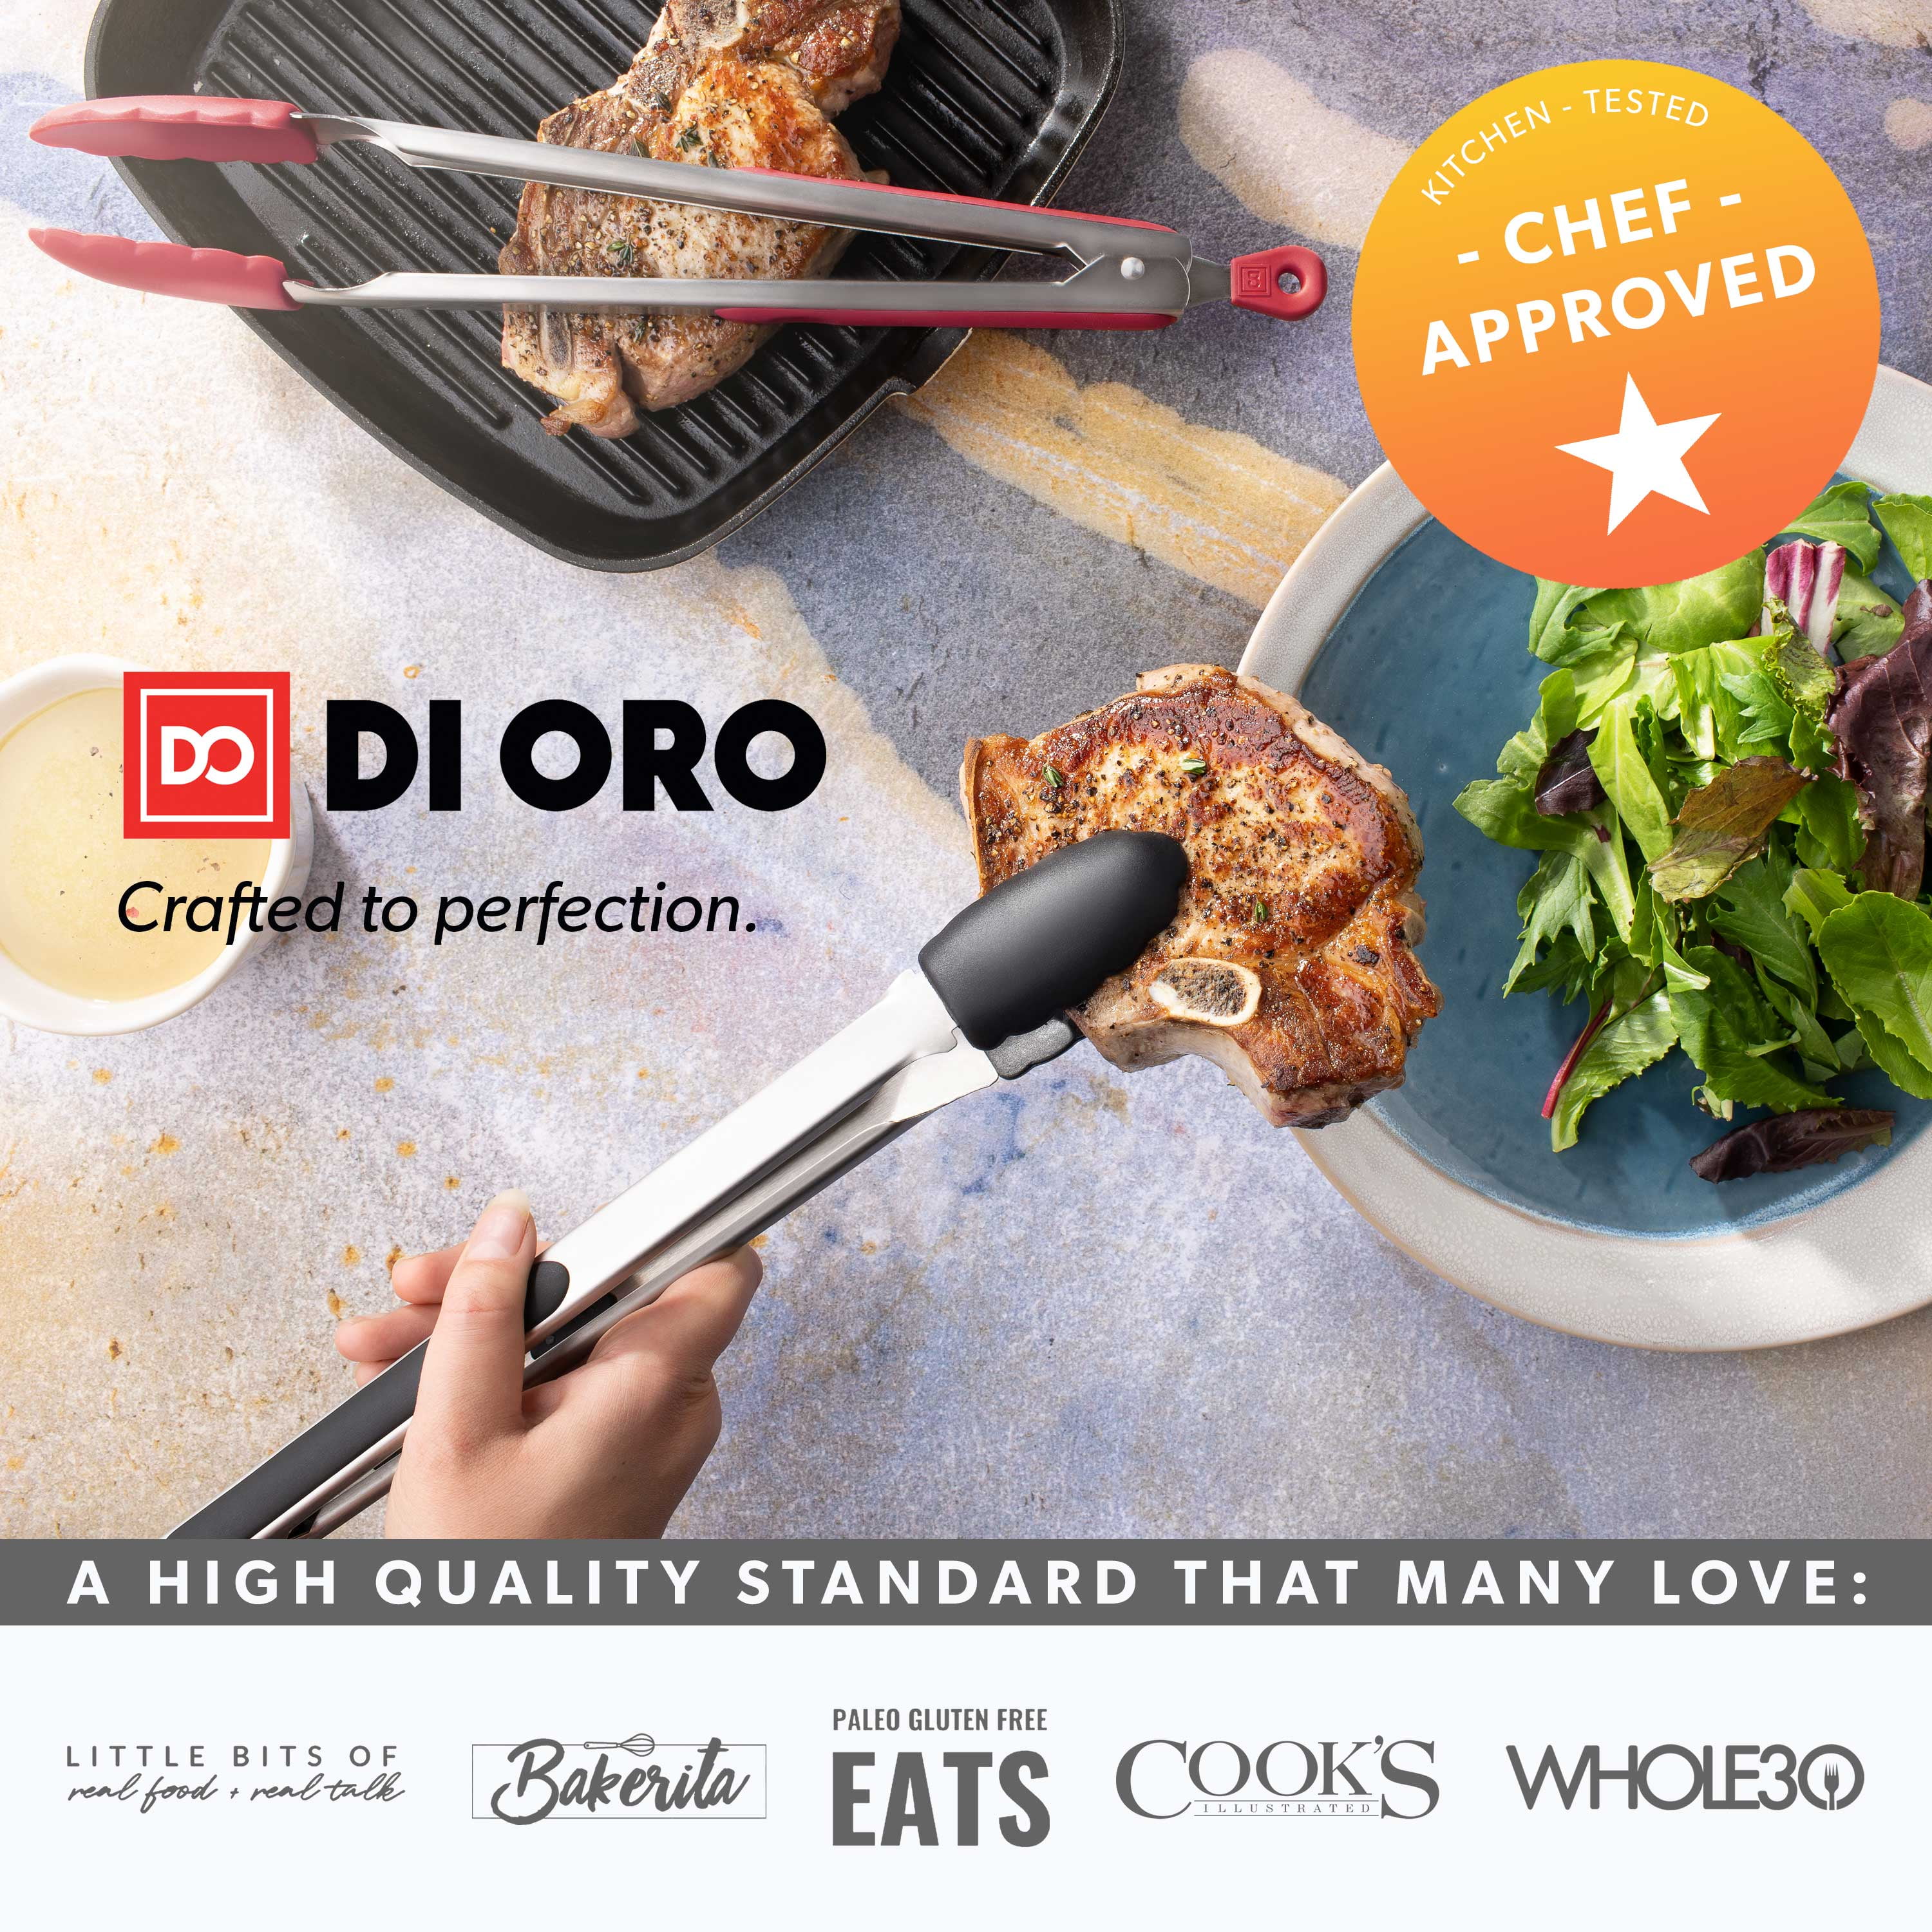 and Barbecuing New DI ORO 12-Inch Kitchen Tongs – Stainless Steel with Non-Stick 480F Heat-Resistant BPA Free Silicone Tips – Great Tool for Cooking Dishwasher Safe and Easy to Clean Black Serving